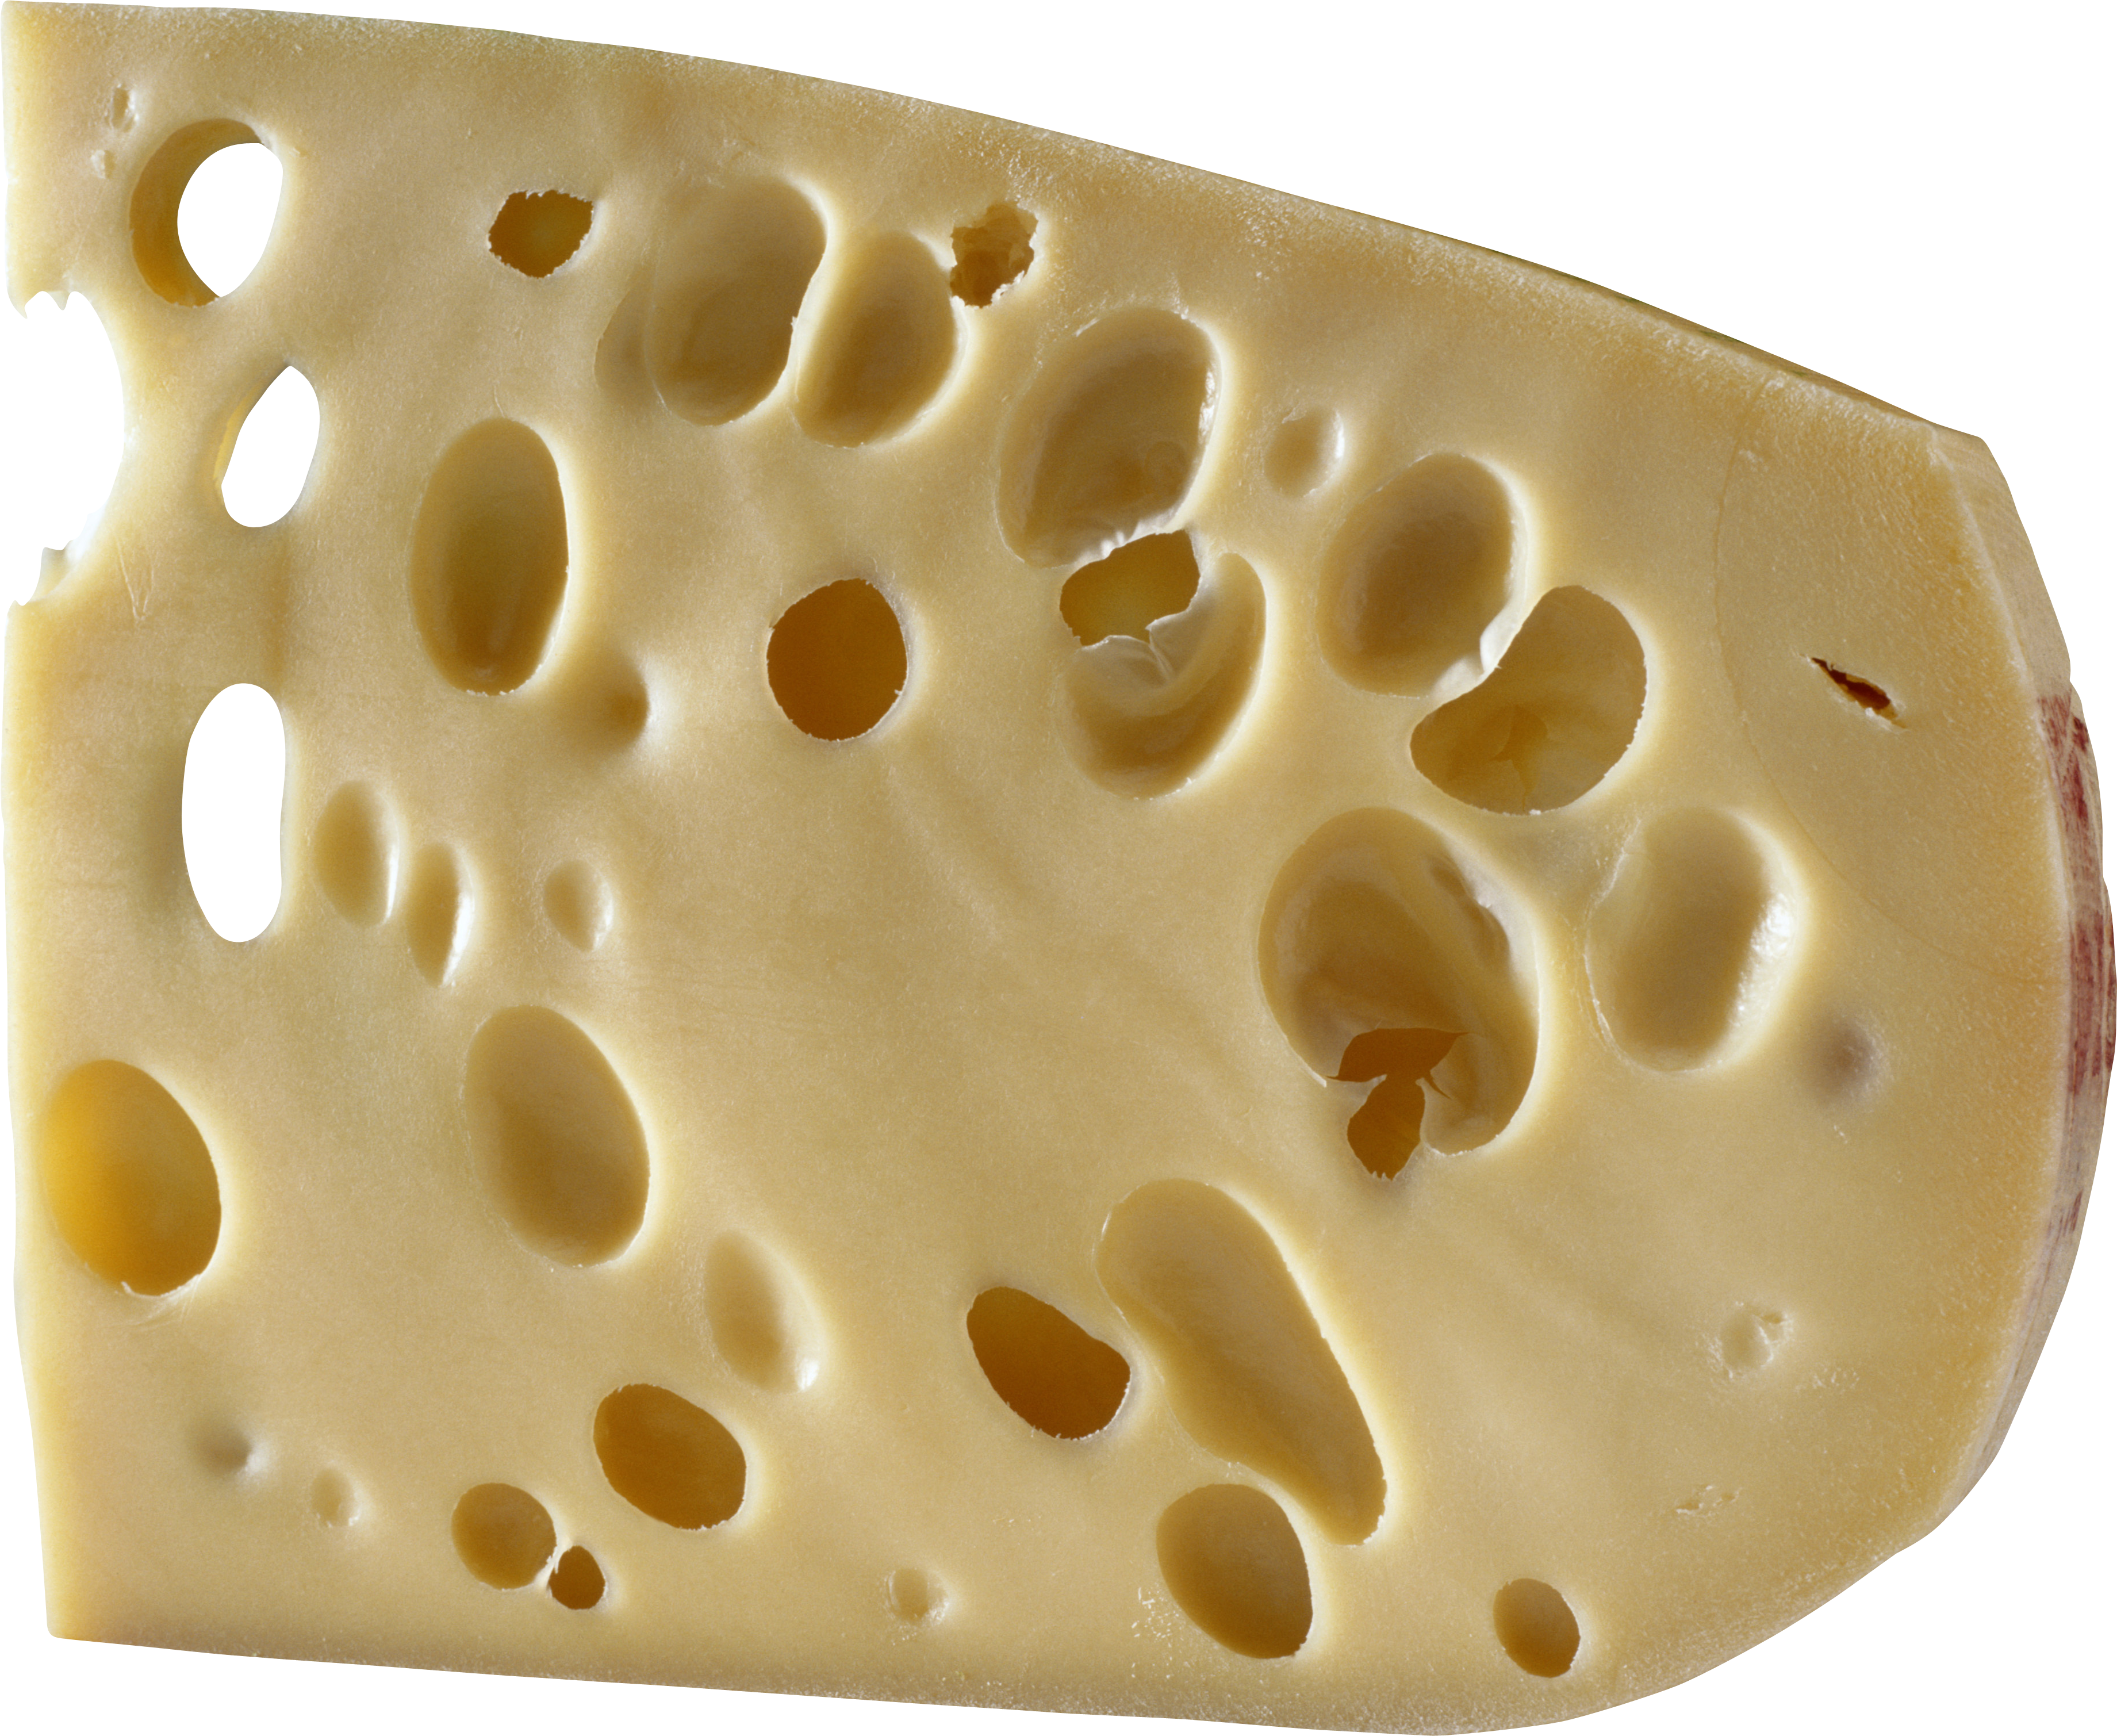 Cheese.png PlusPng.com 